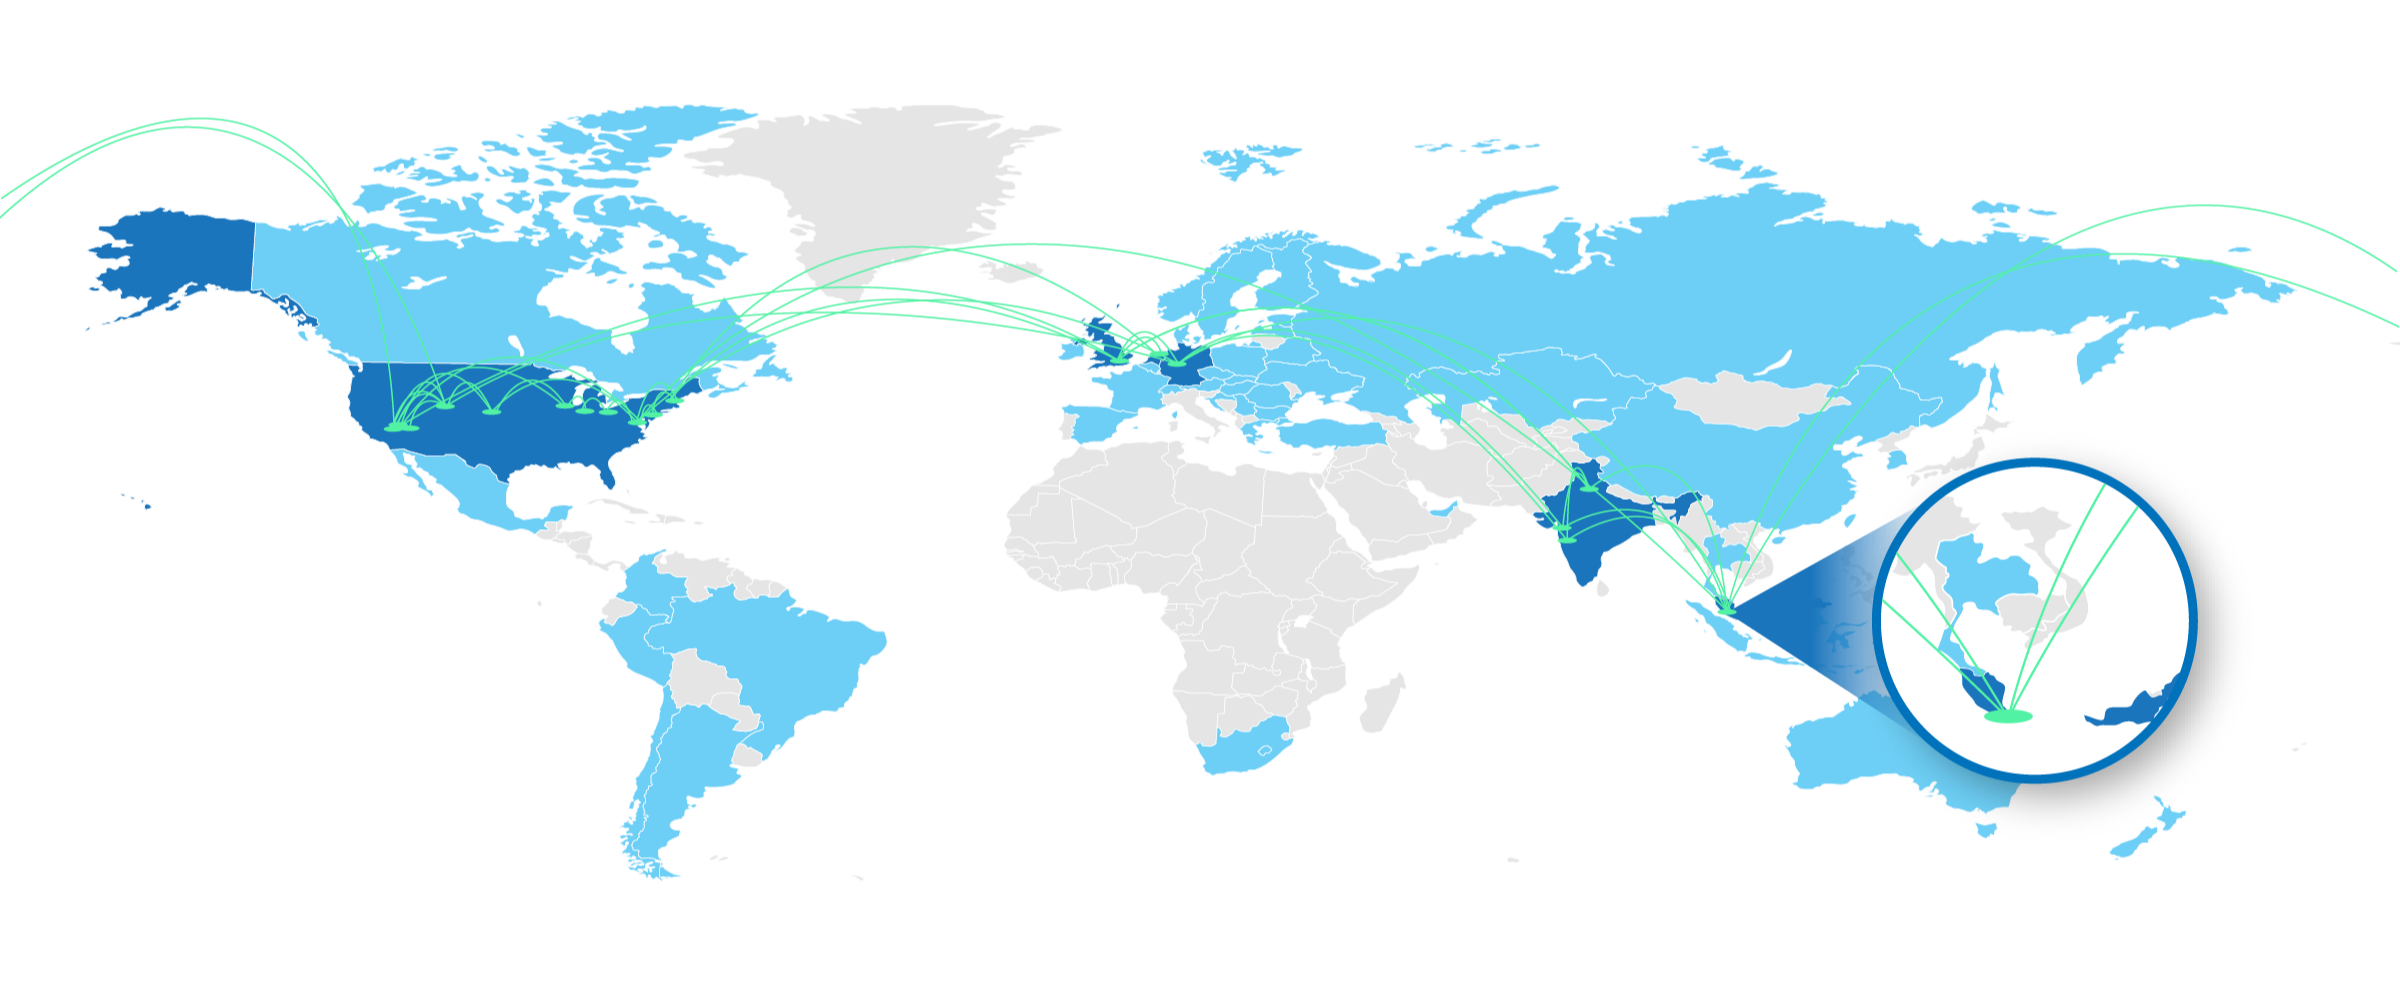 IMDC Data Center Global Map Borders MAP LINE - CroppedS - MASTER@3x-1